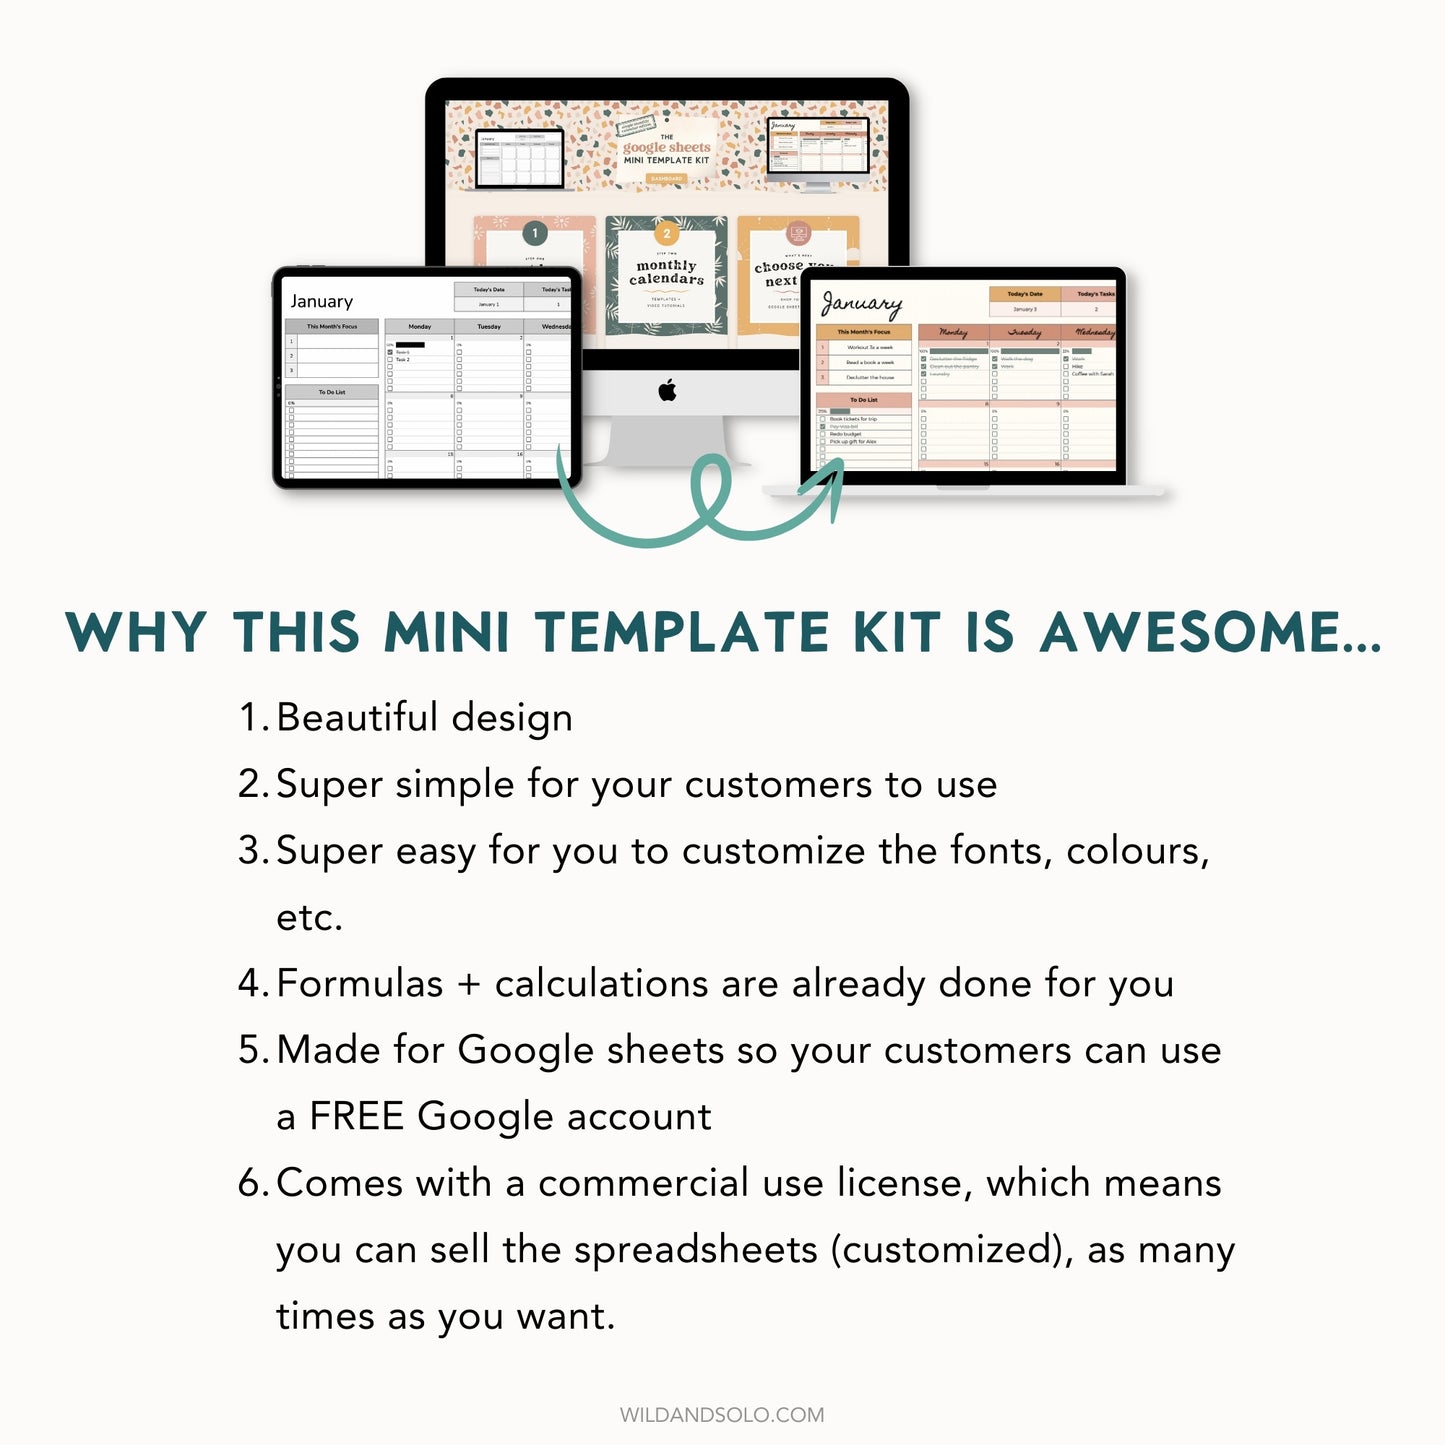 The Google Sheets Mini Template Kit - Simple Monthly Calendar Edition